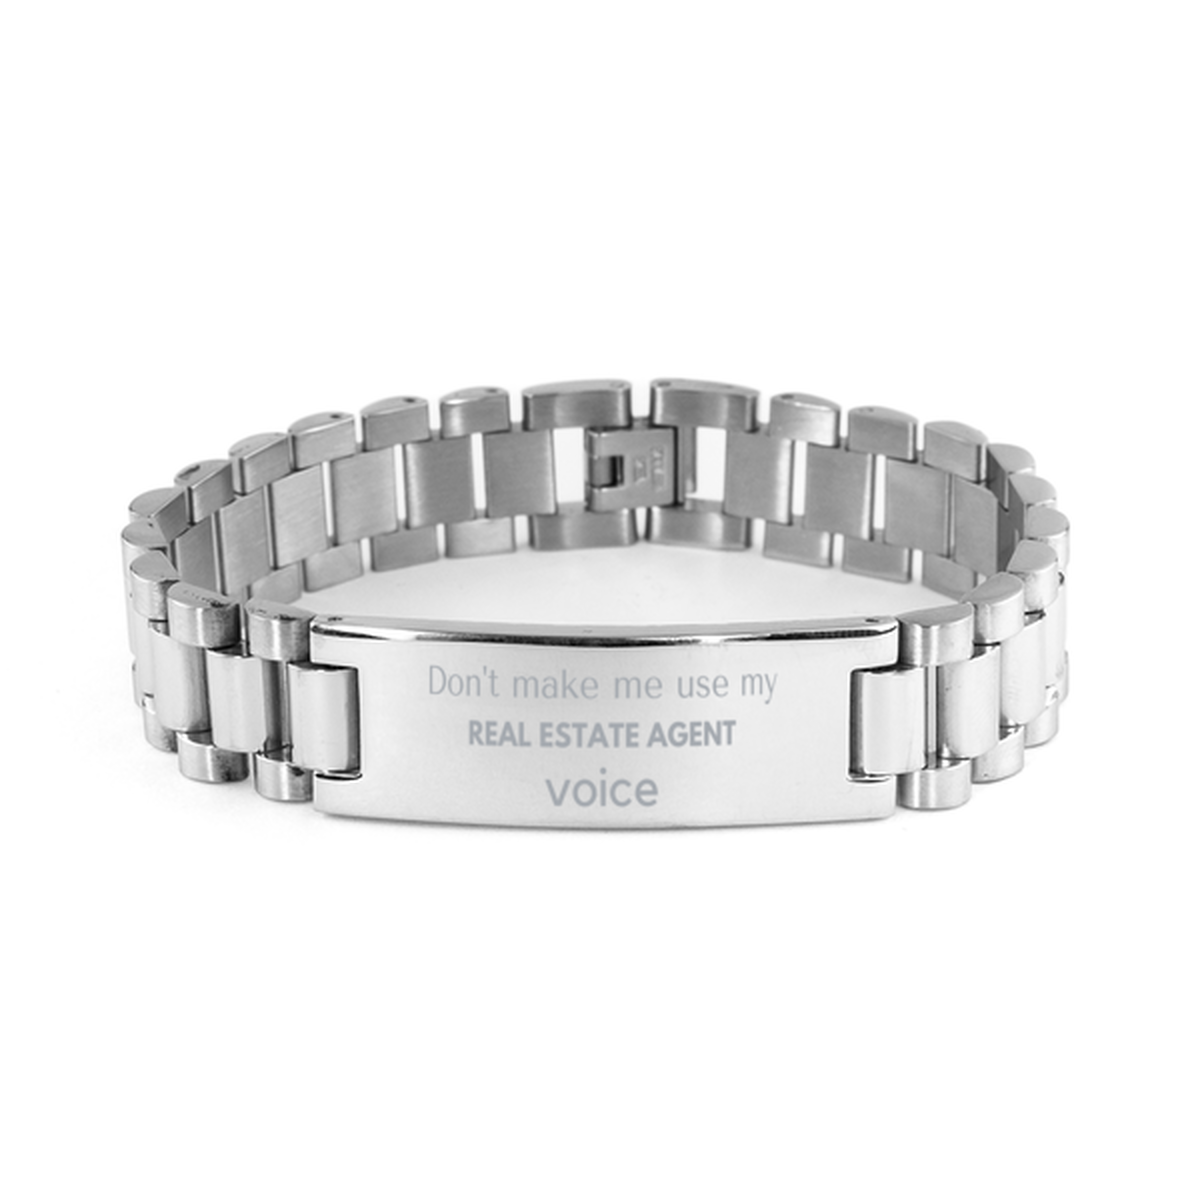 Don't make me use my Real Estate Agent voice, Sarcasm Real Estate Agent Gifts, Christmas Real Estate Agent Ladder Stainless Steel Bracelet Birthday Unique Gifts For Real Estate Agent Coworkers, Men, Women, Colleague, Friends